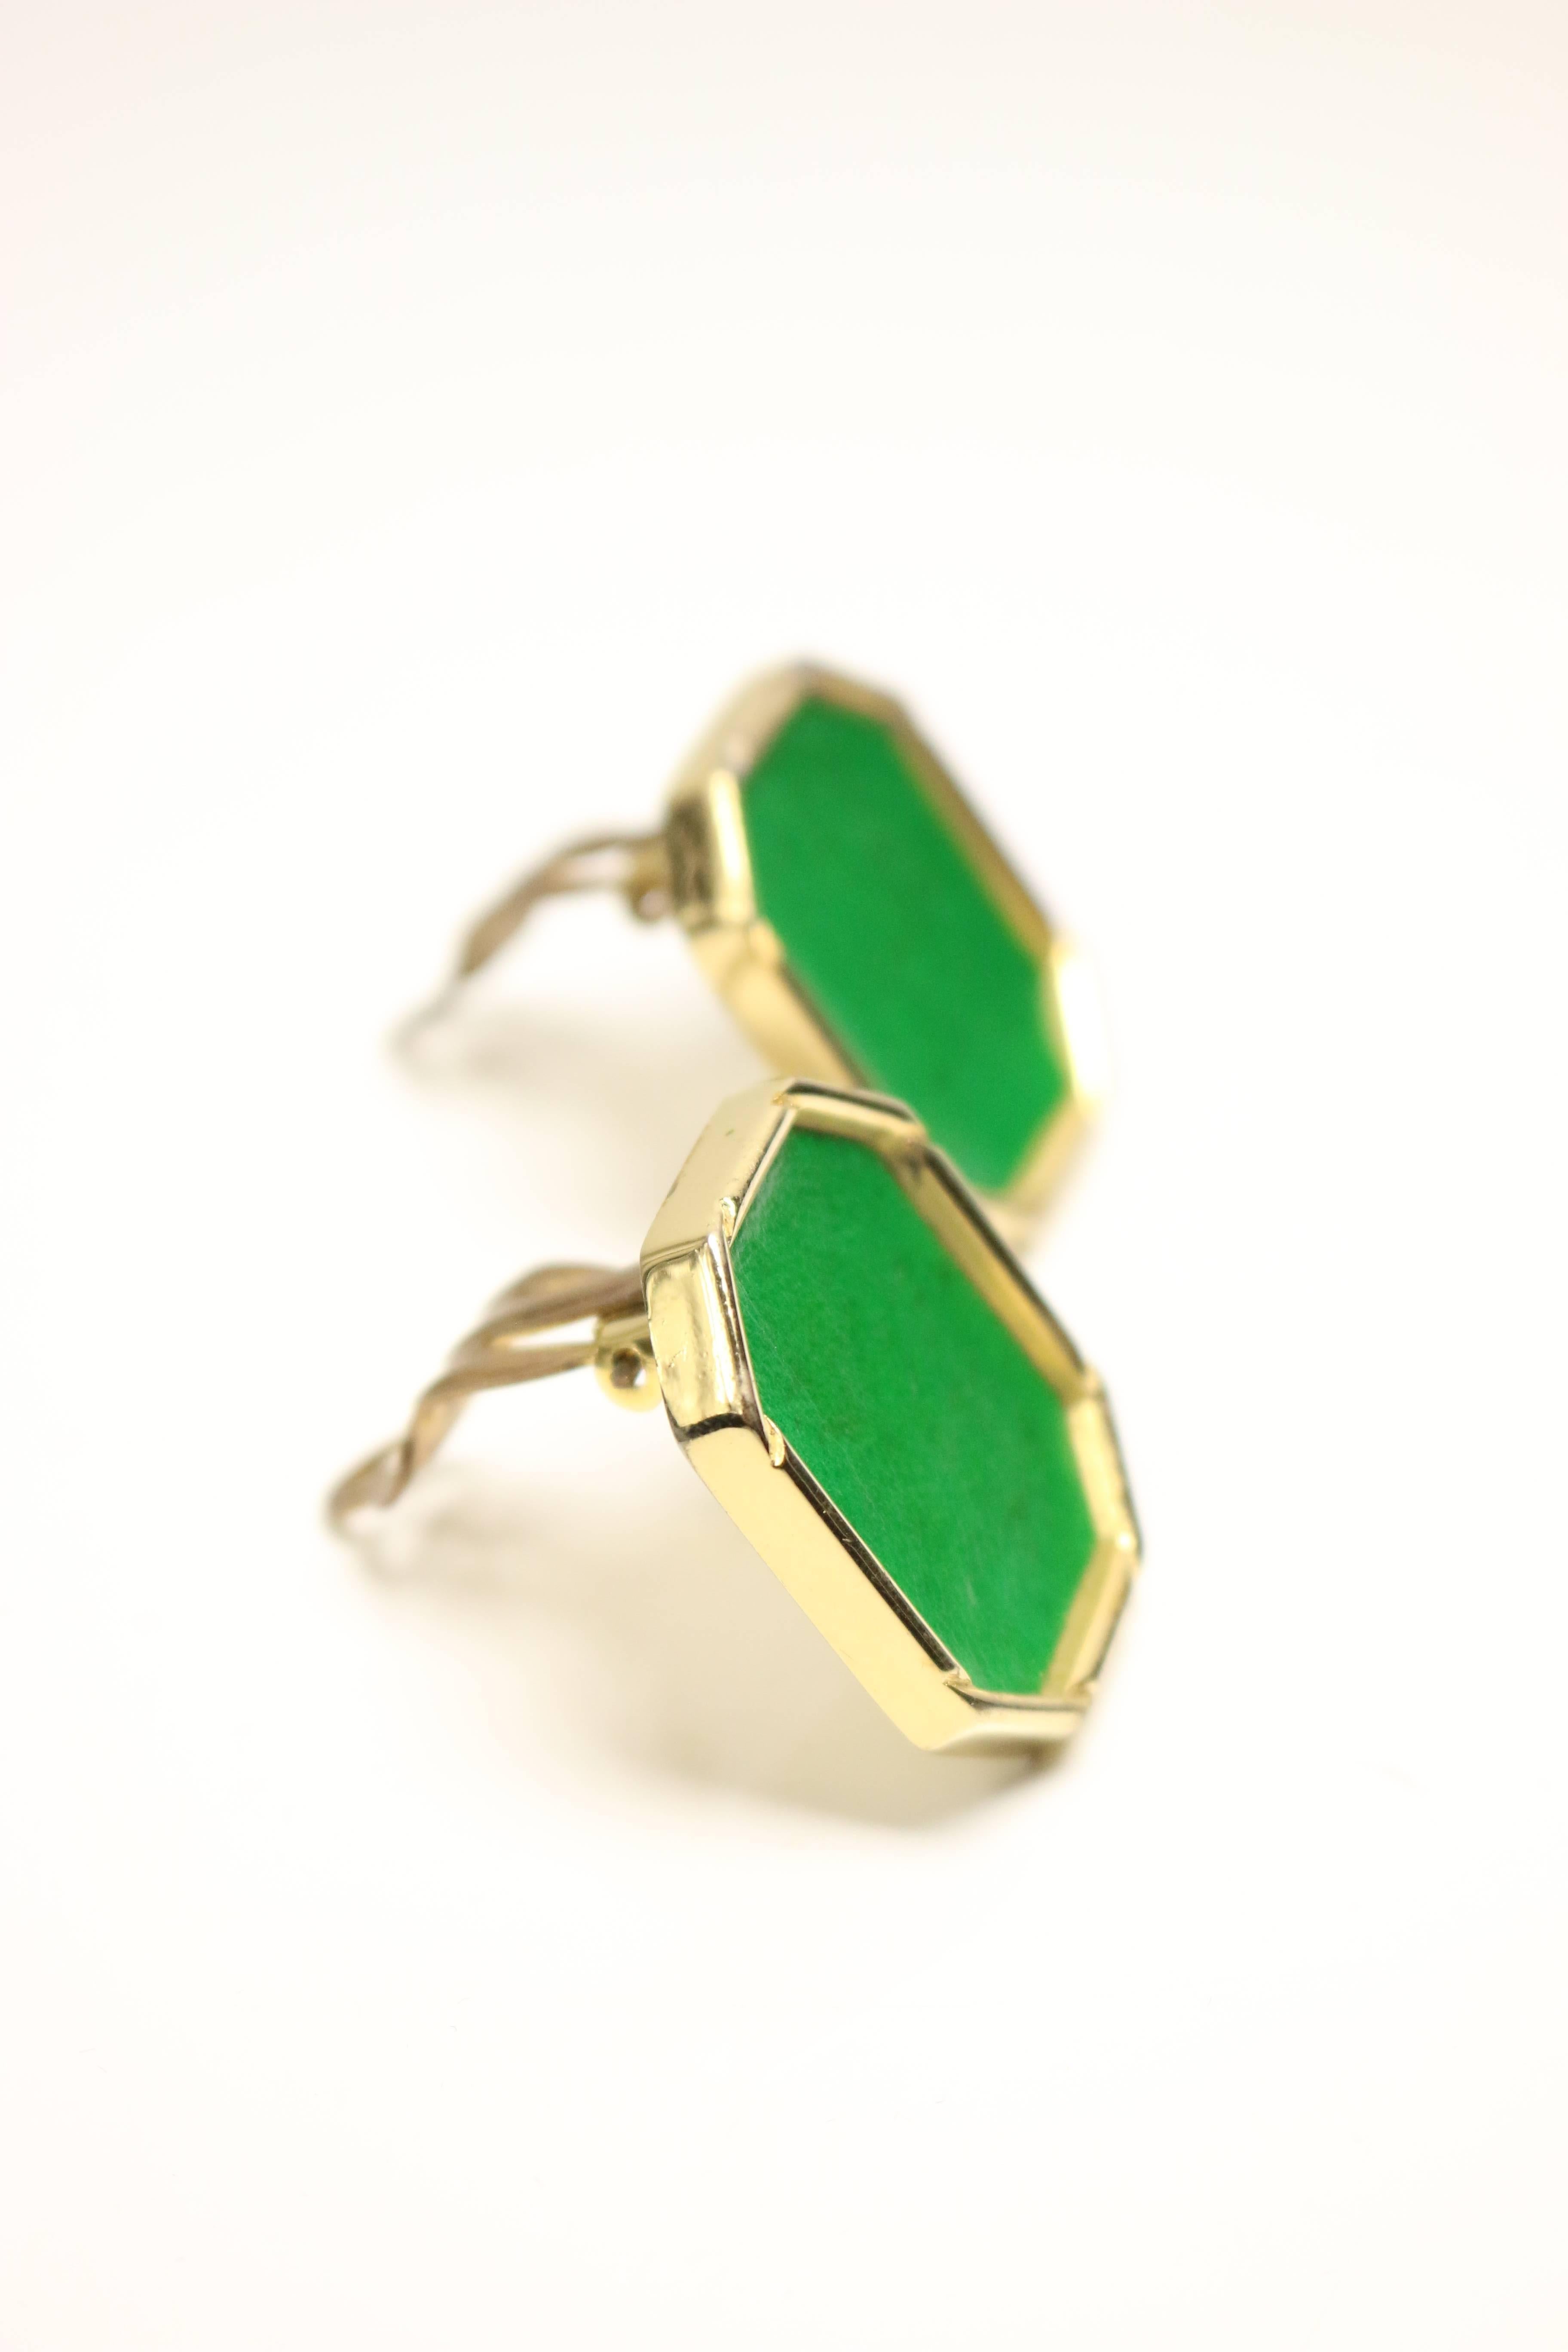 - Vintage 80s green leather octagon gold toned hardware clip on earrings. 

- Length: 0.9 inches. Height: 1.25 inches. 
